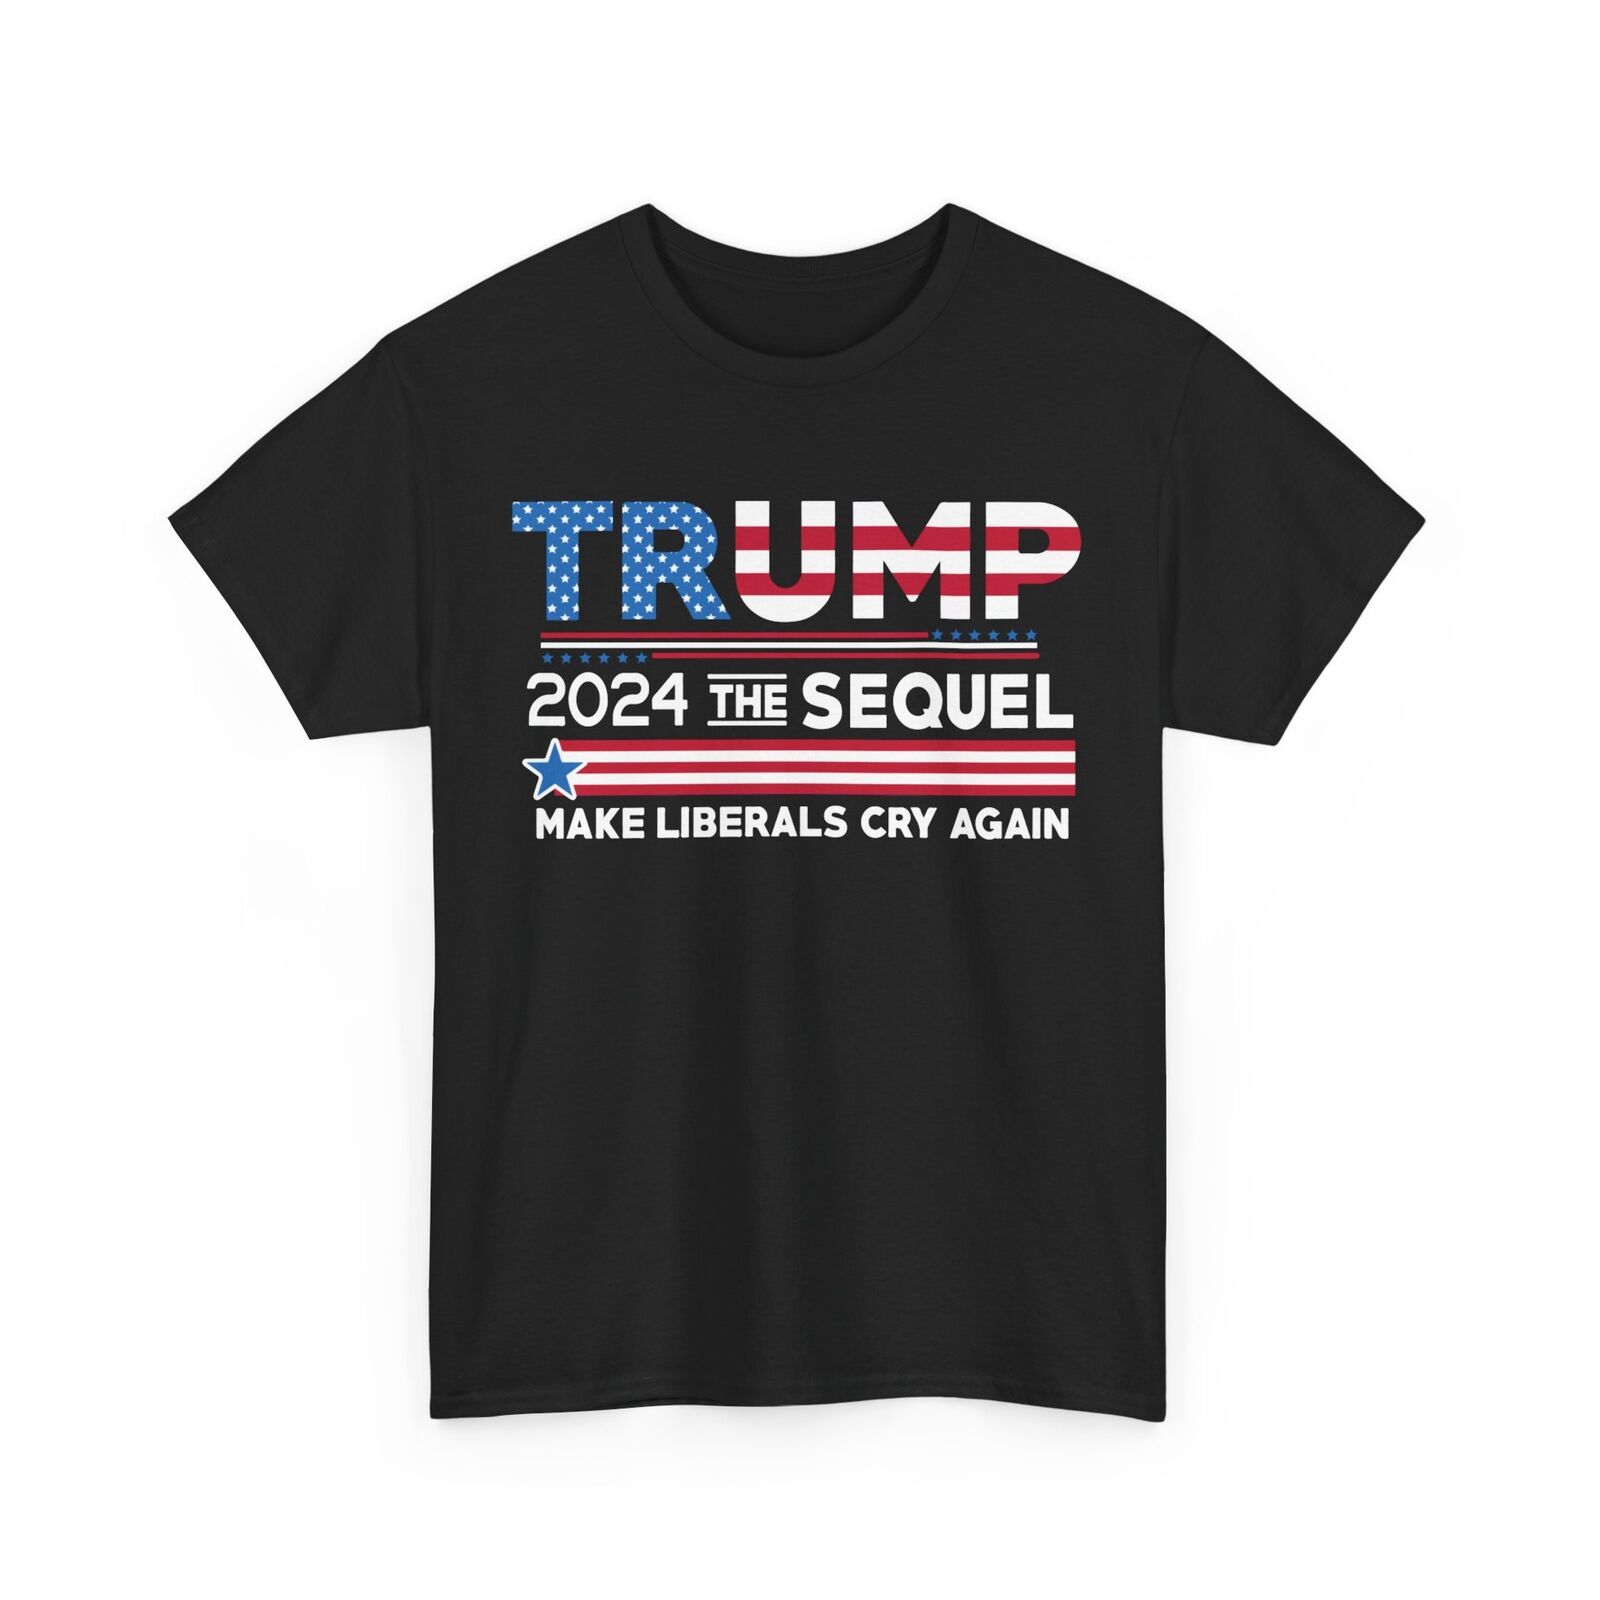 Trump Donald President T Shirt Tee Funny 2024 Elections Make Liberals Cry Again